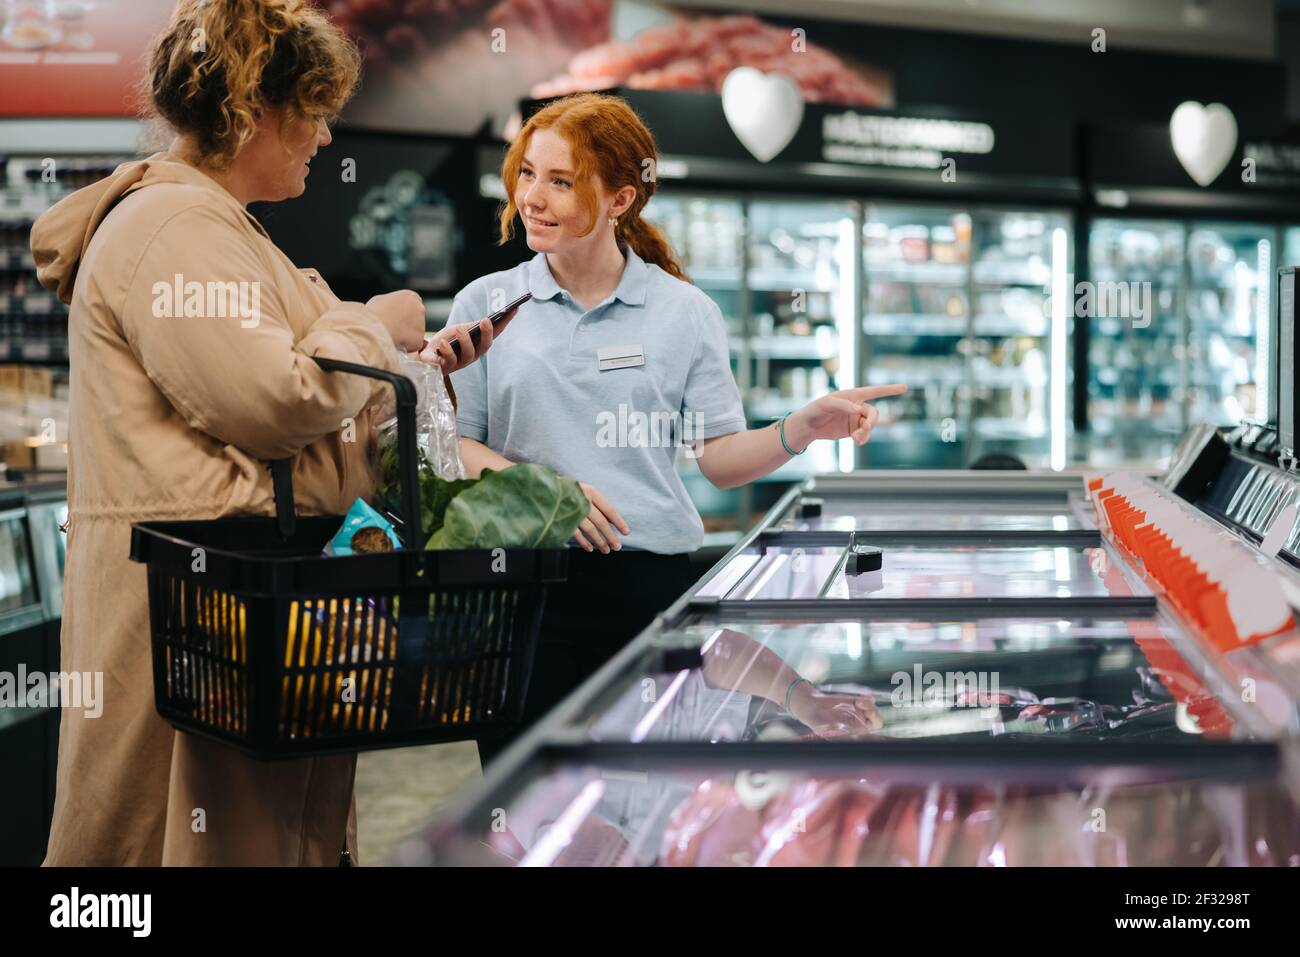 Young shop assistant helping female customer in grocery store. Saleswoman assisting shopper in supermarket. Stock Photo